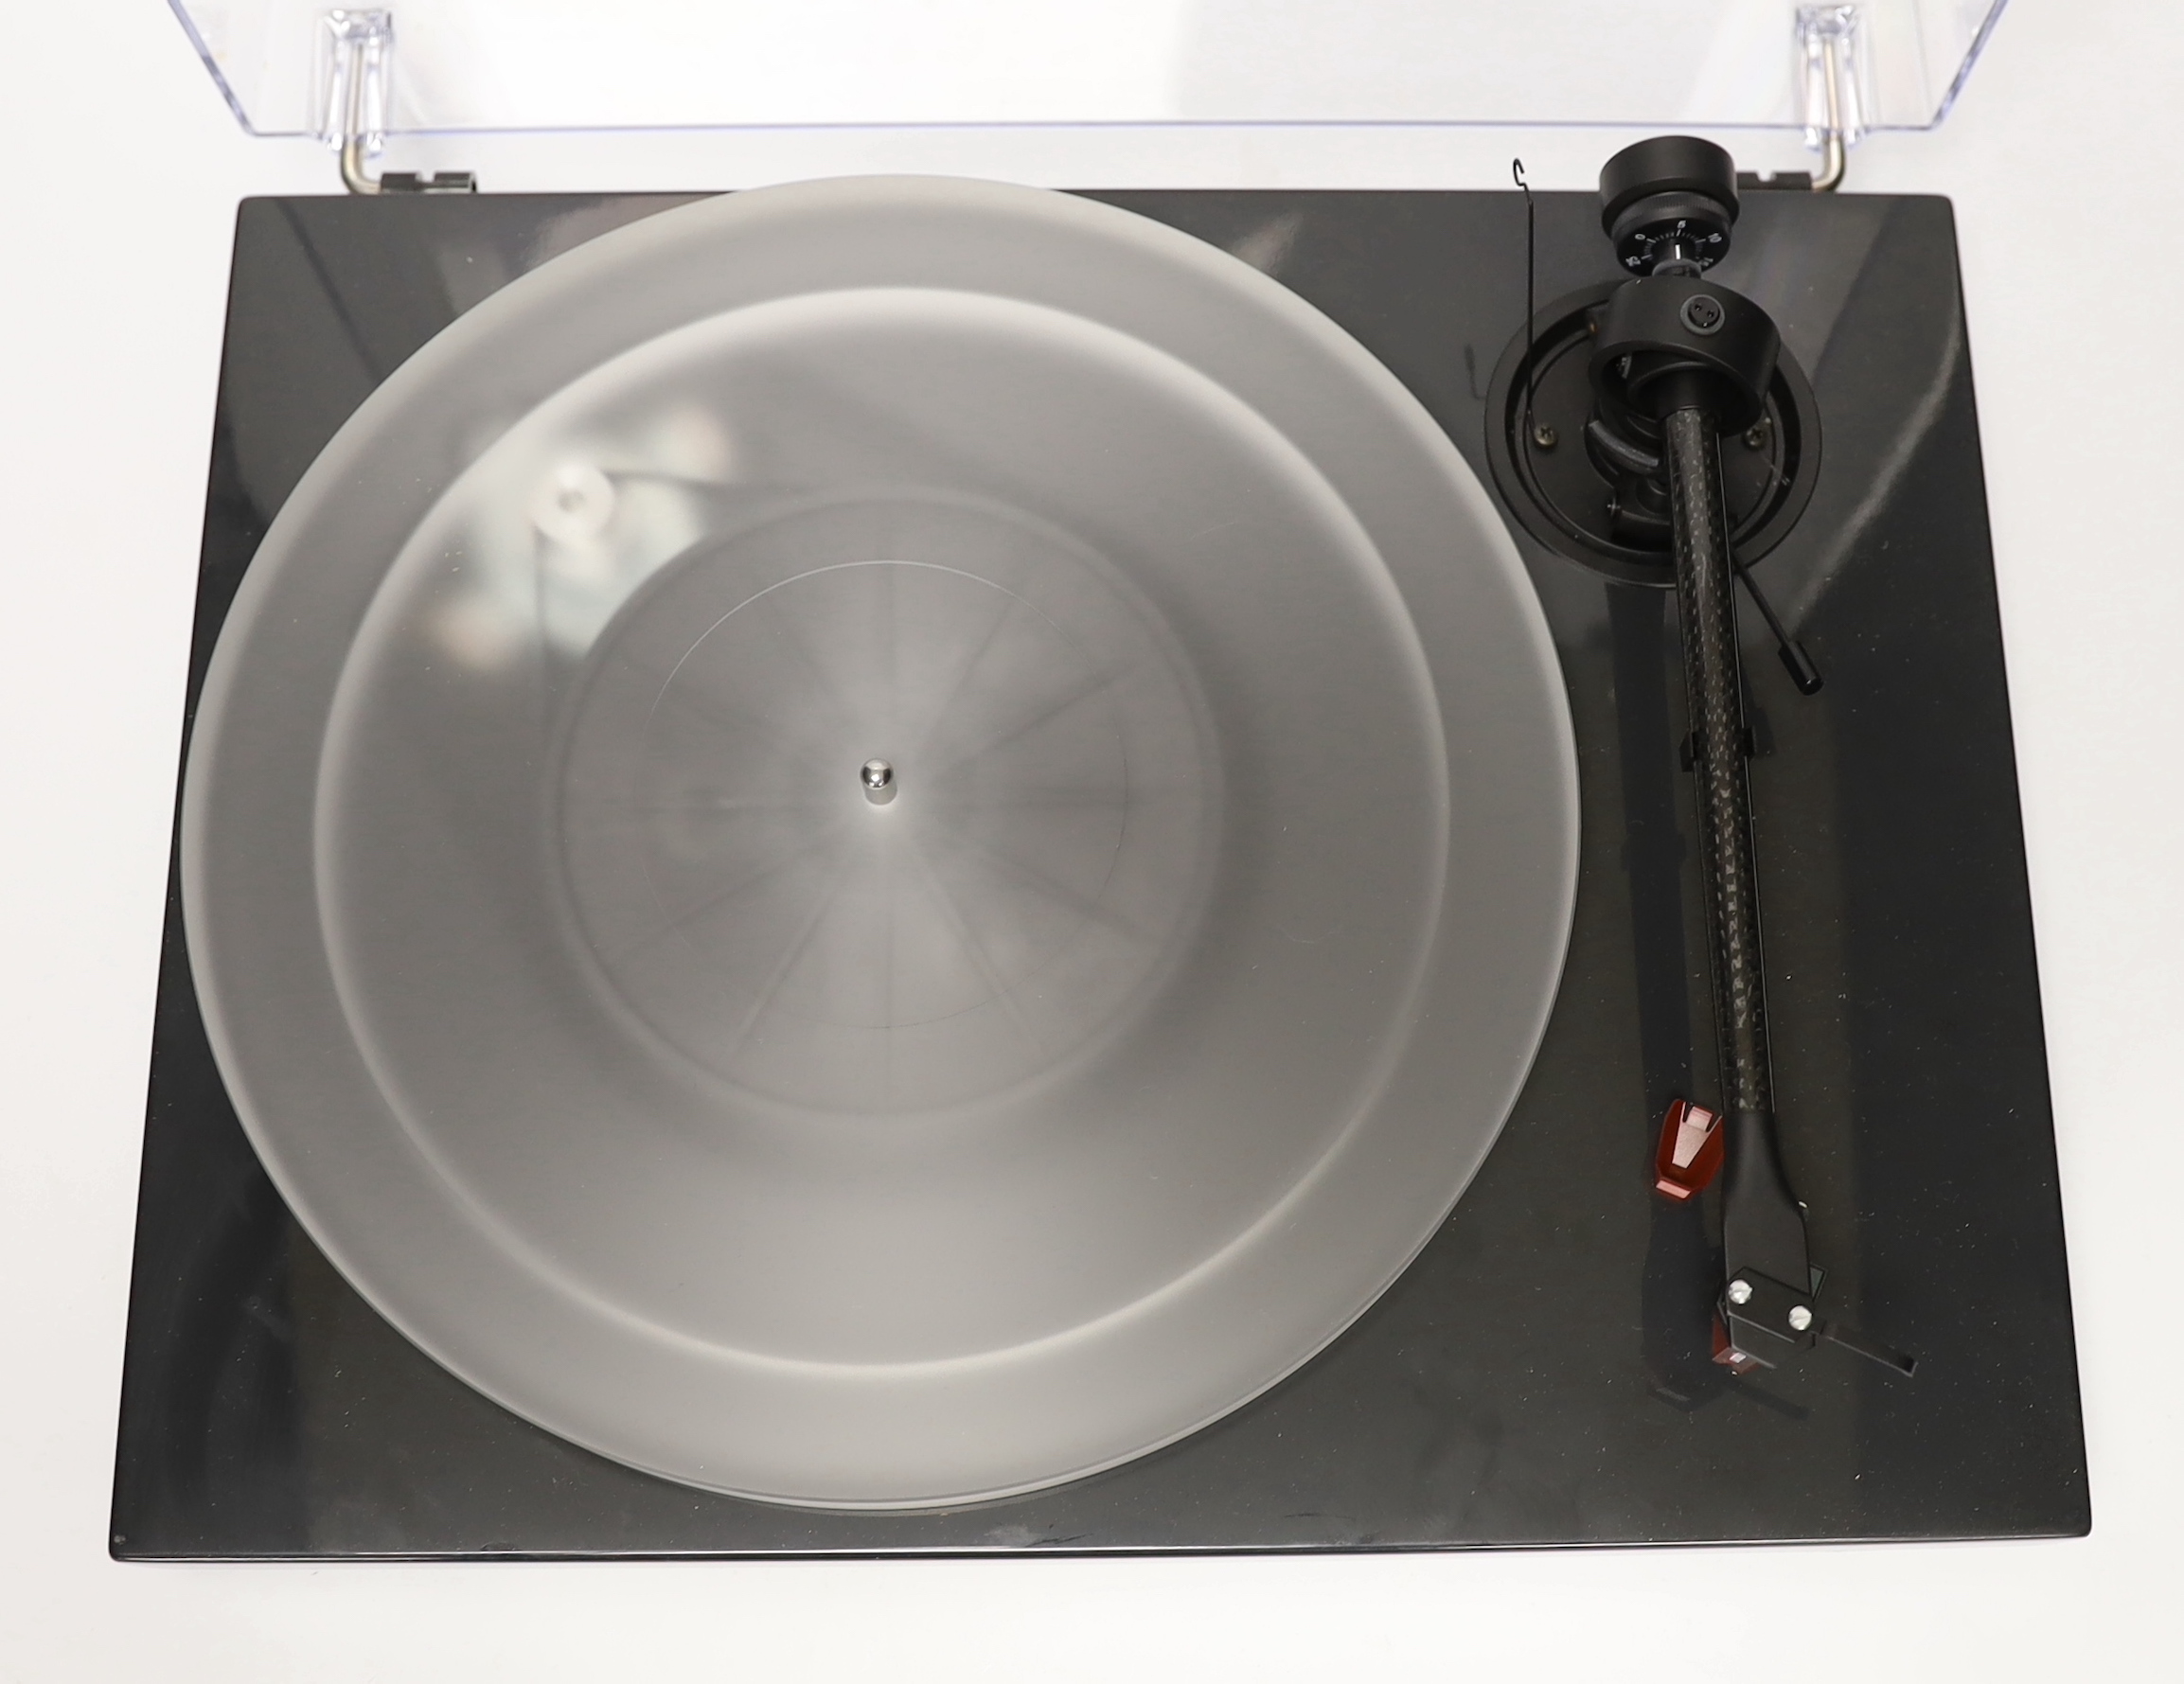 A Pro-ject I-Xpression III turntable